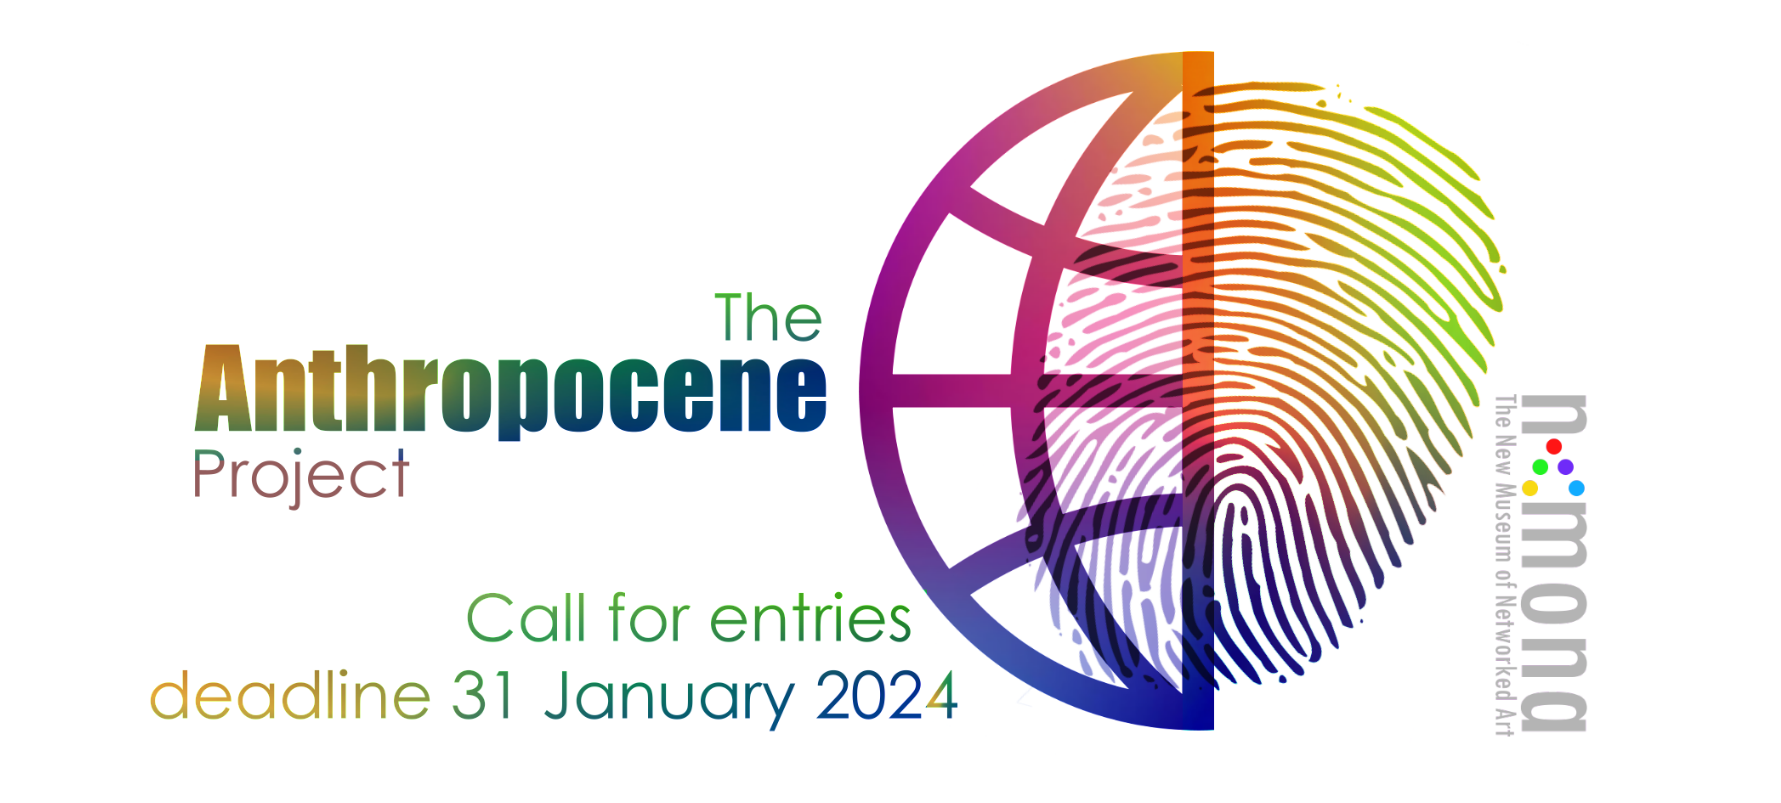 The Anthropocene Project